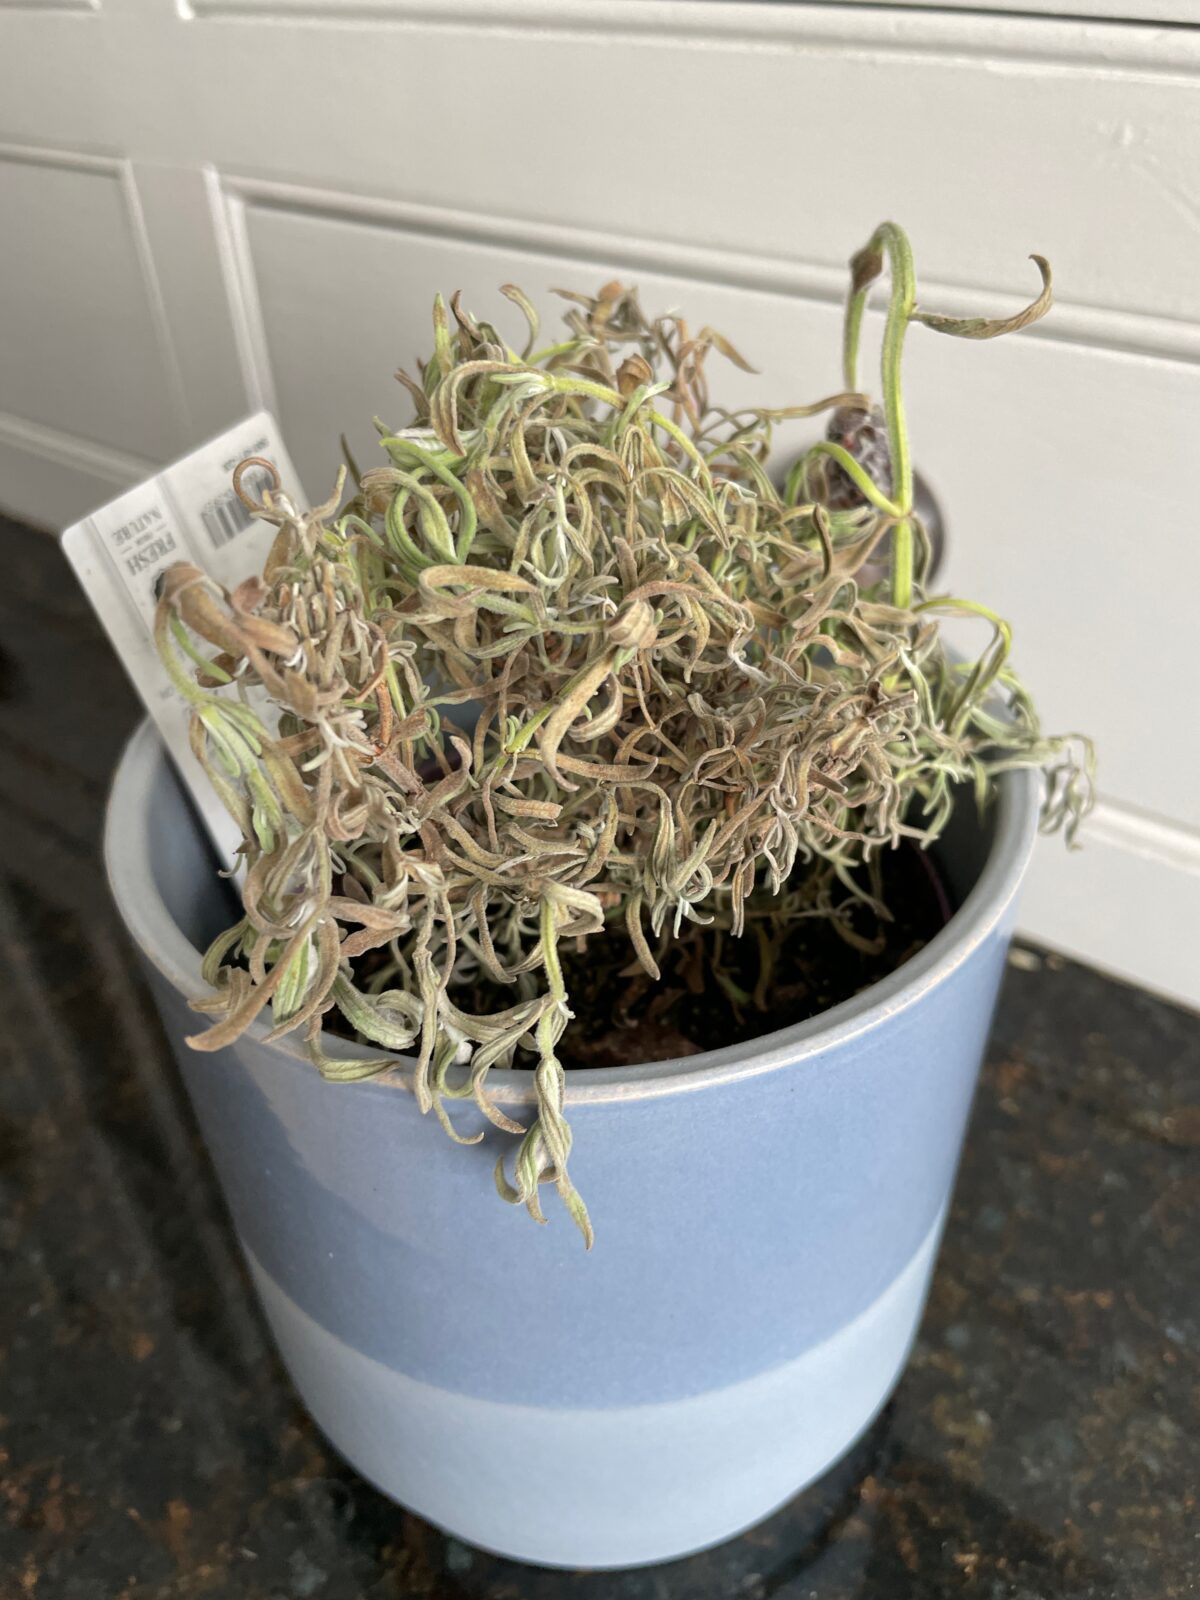 How to Rescue Neglected Houseplants